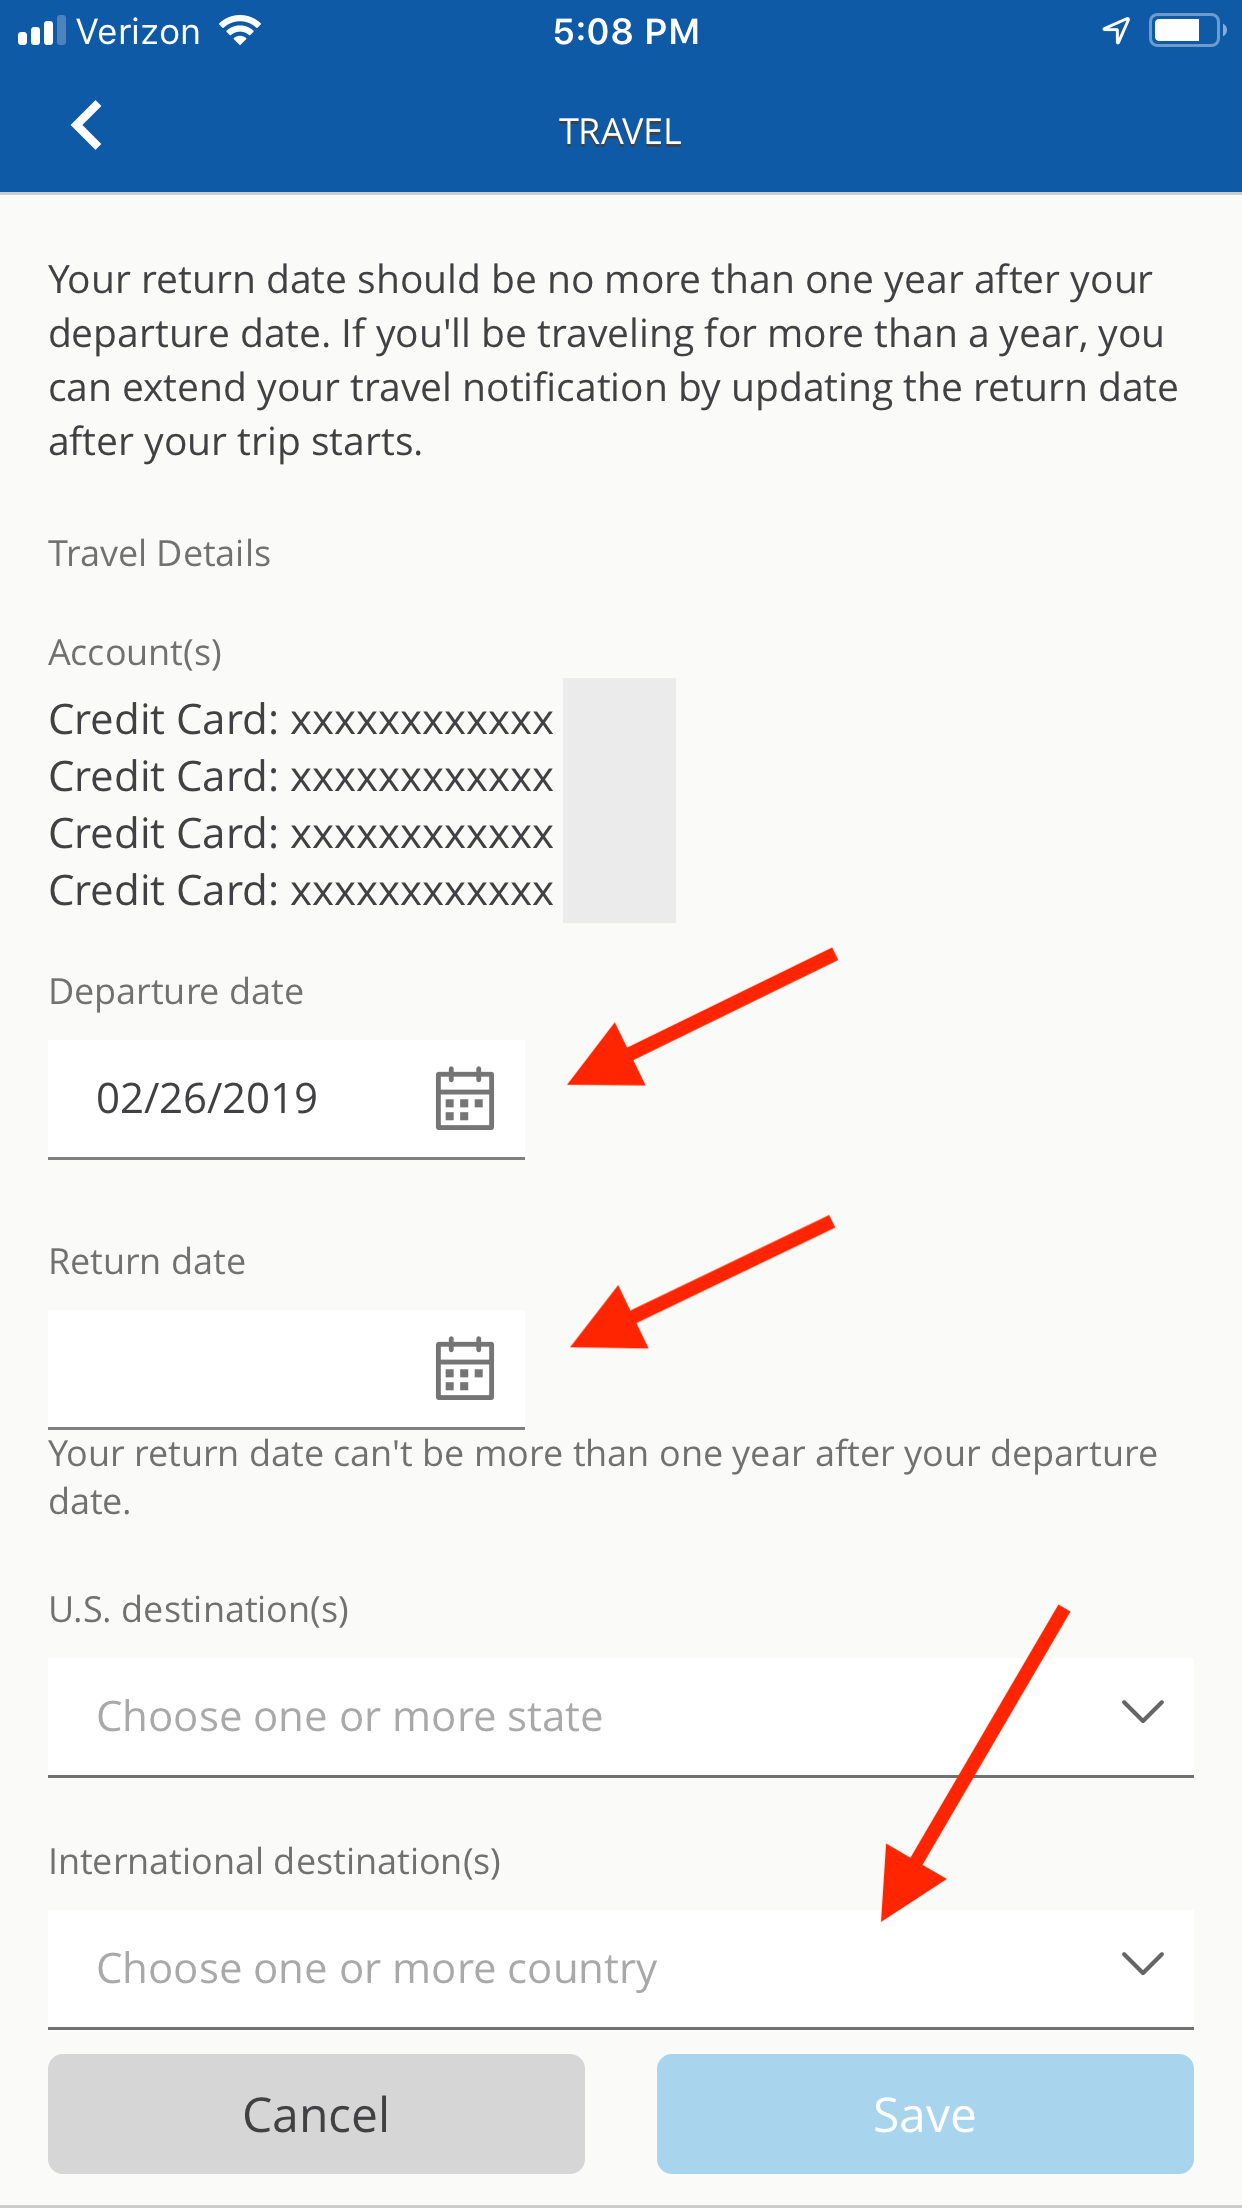 How To Setup A Chase Travel Notice For Your Credit Cards 2021